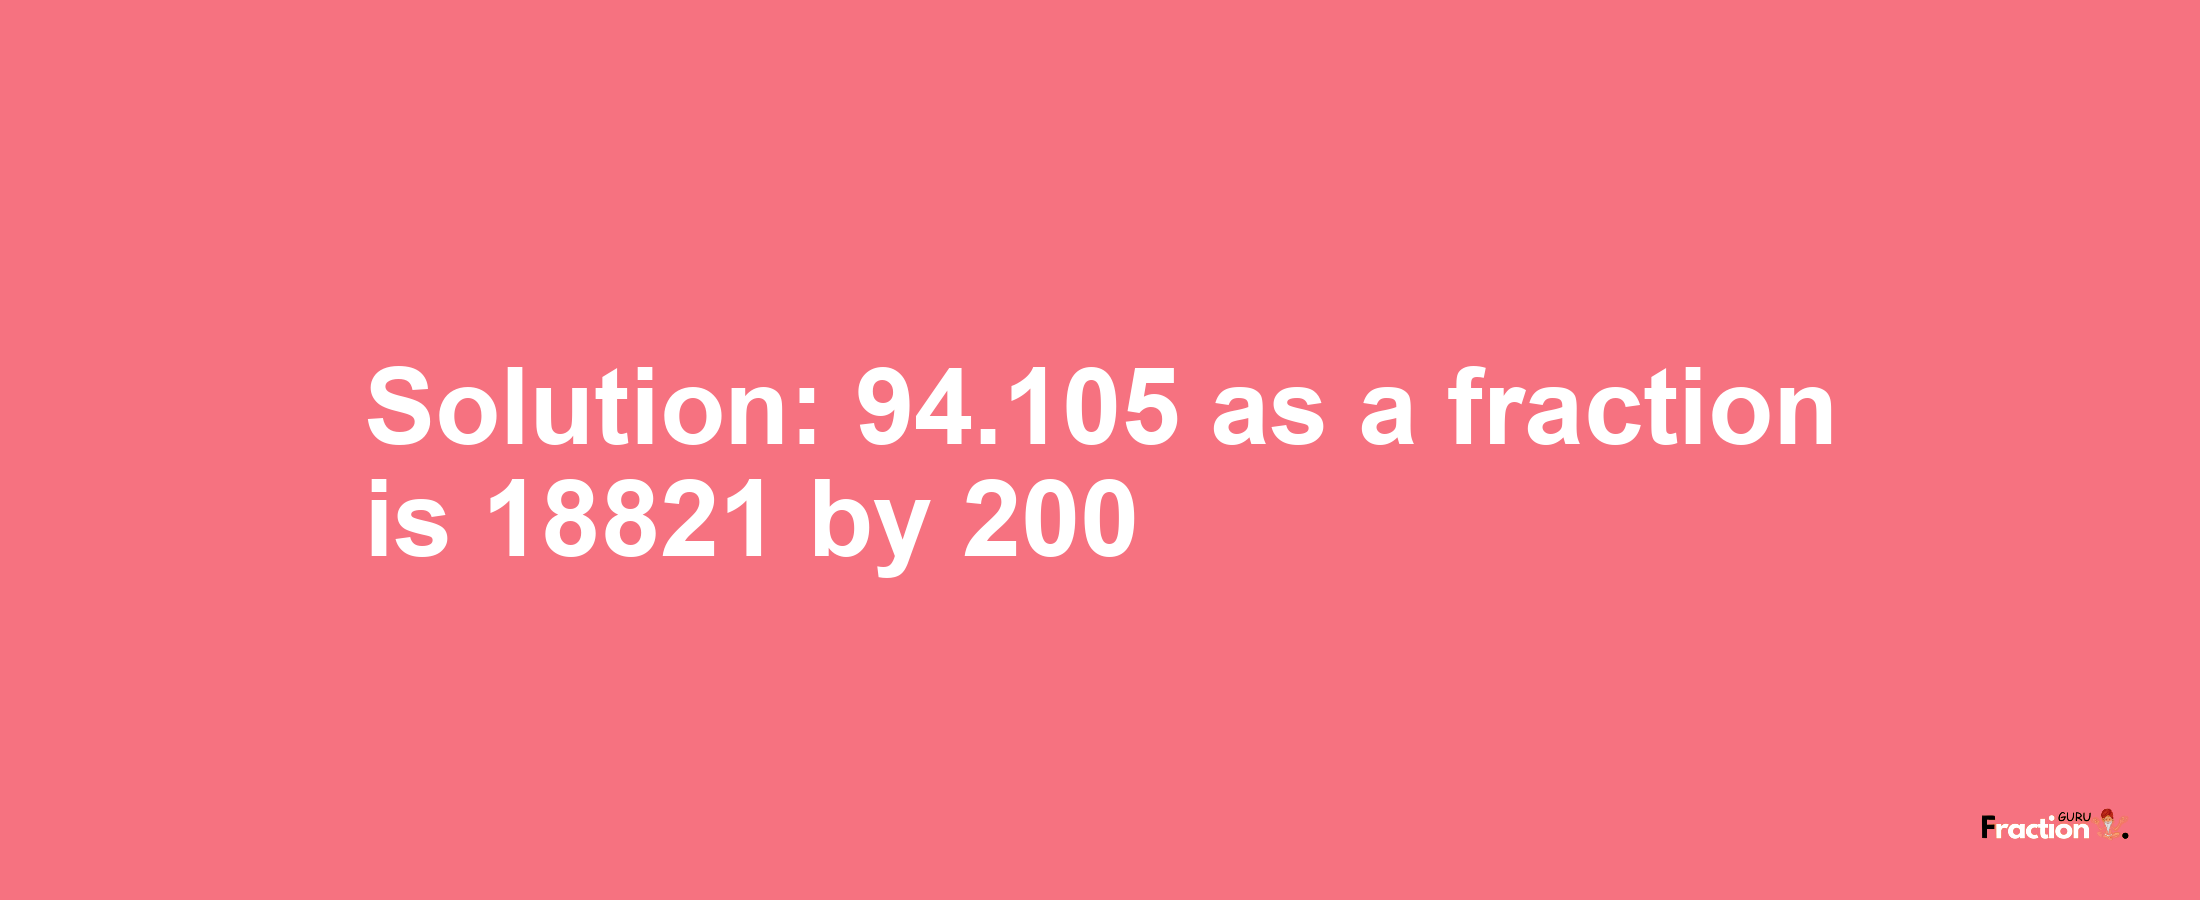 Solution:94.105 as a fraction is 18821/200